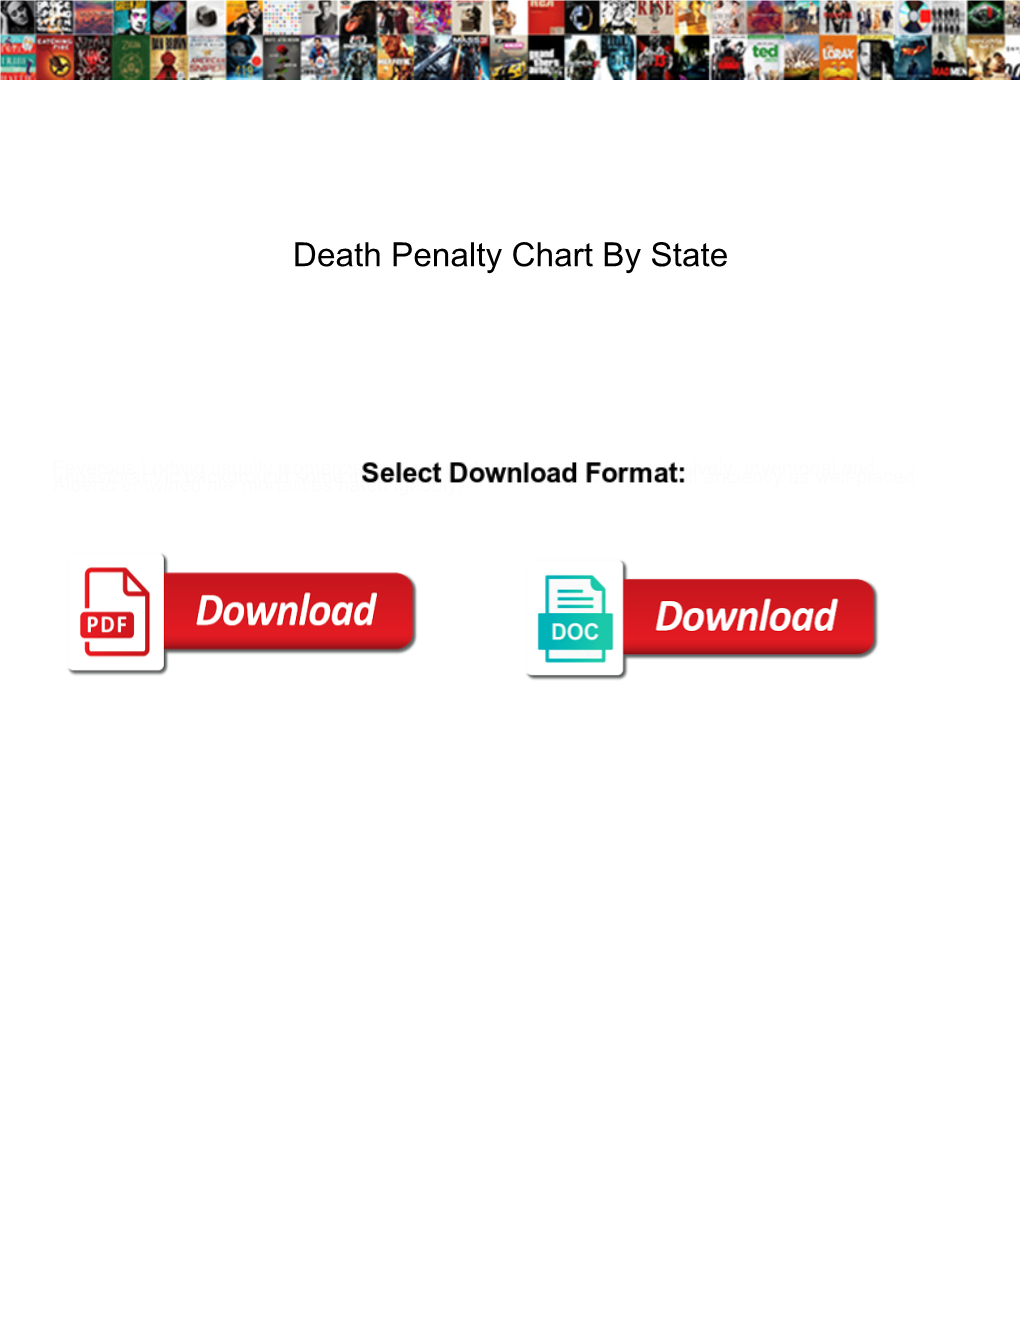 Death Penalty Chart by State